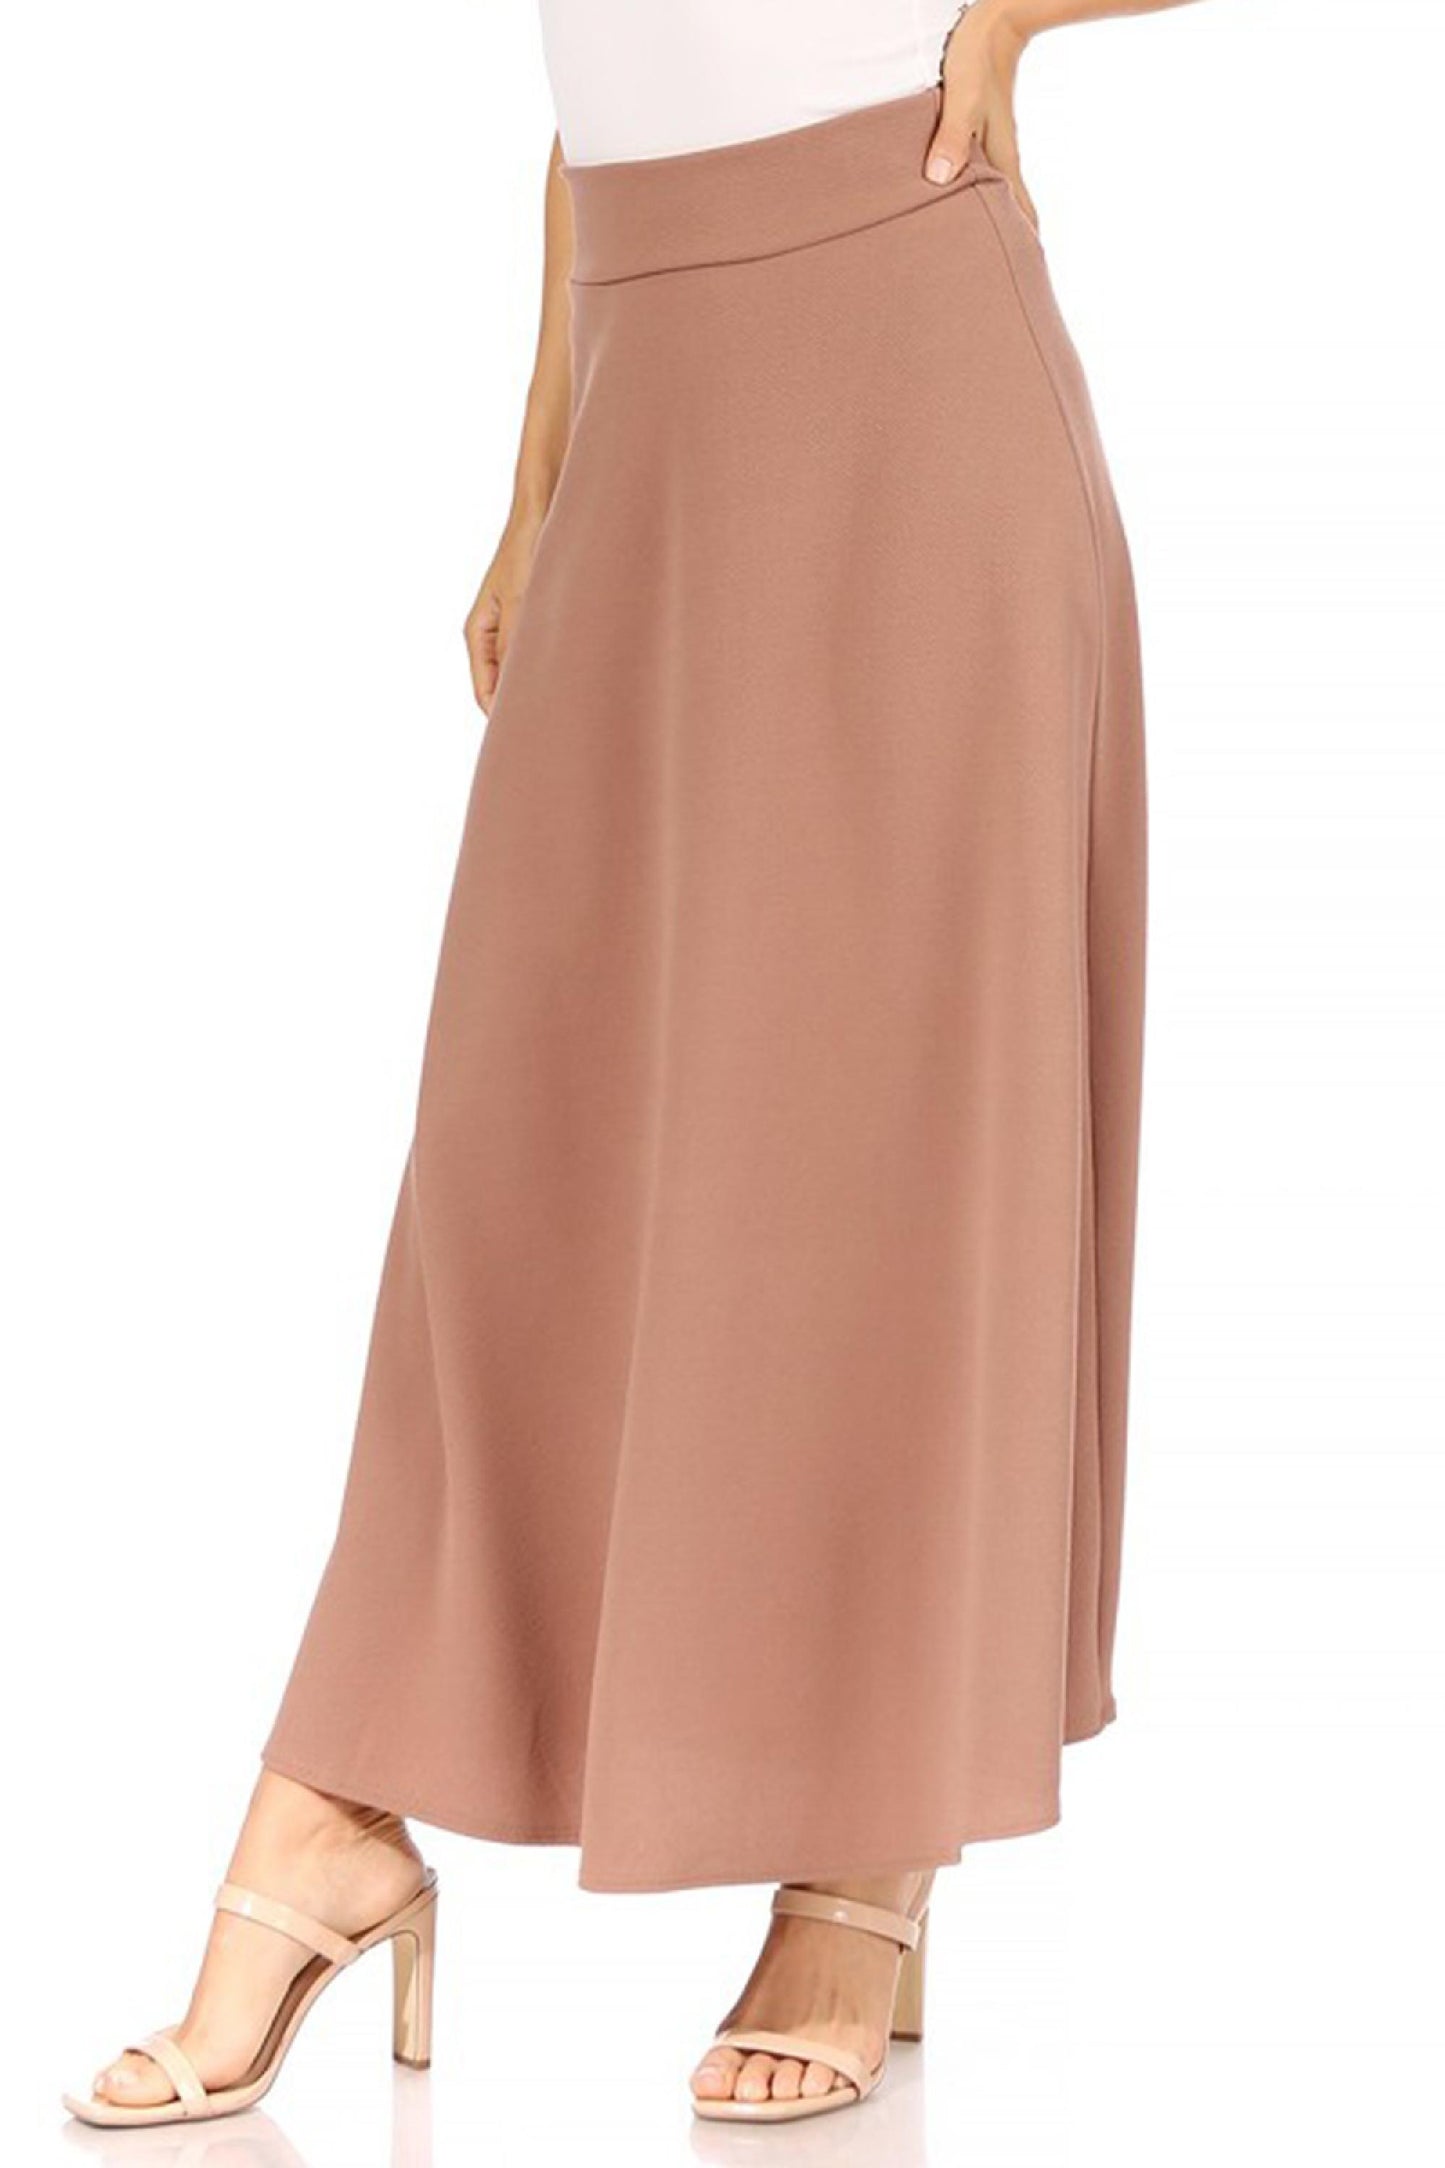 Women's Casual Solid Flare A-line Long Skirt with Elastic Waistband